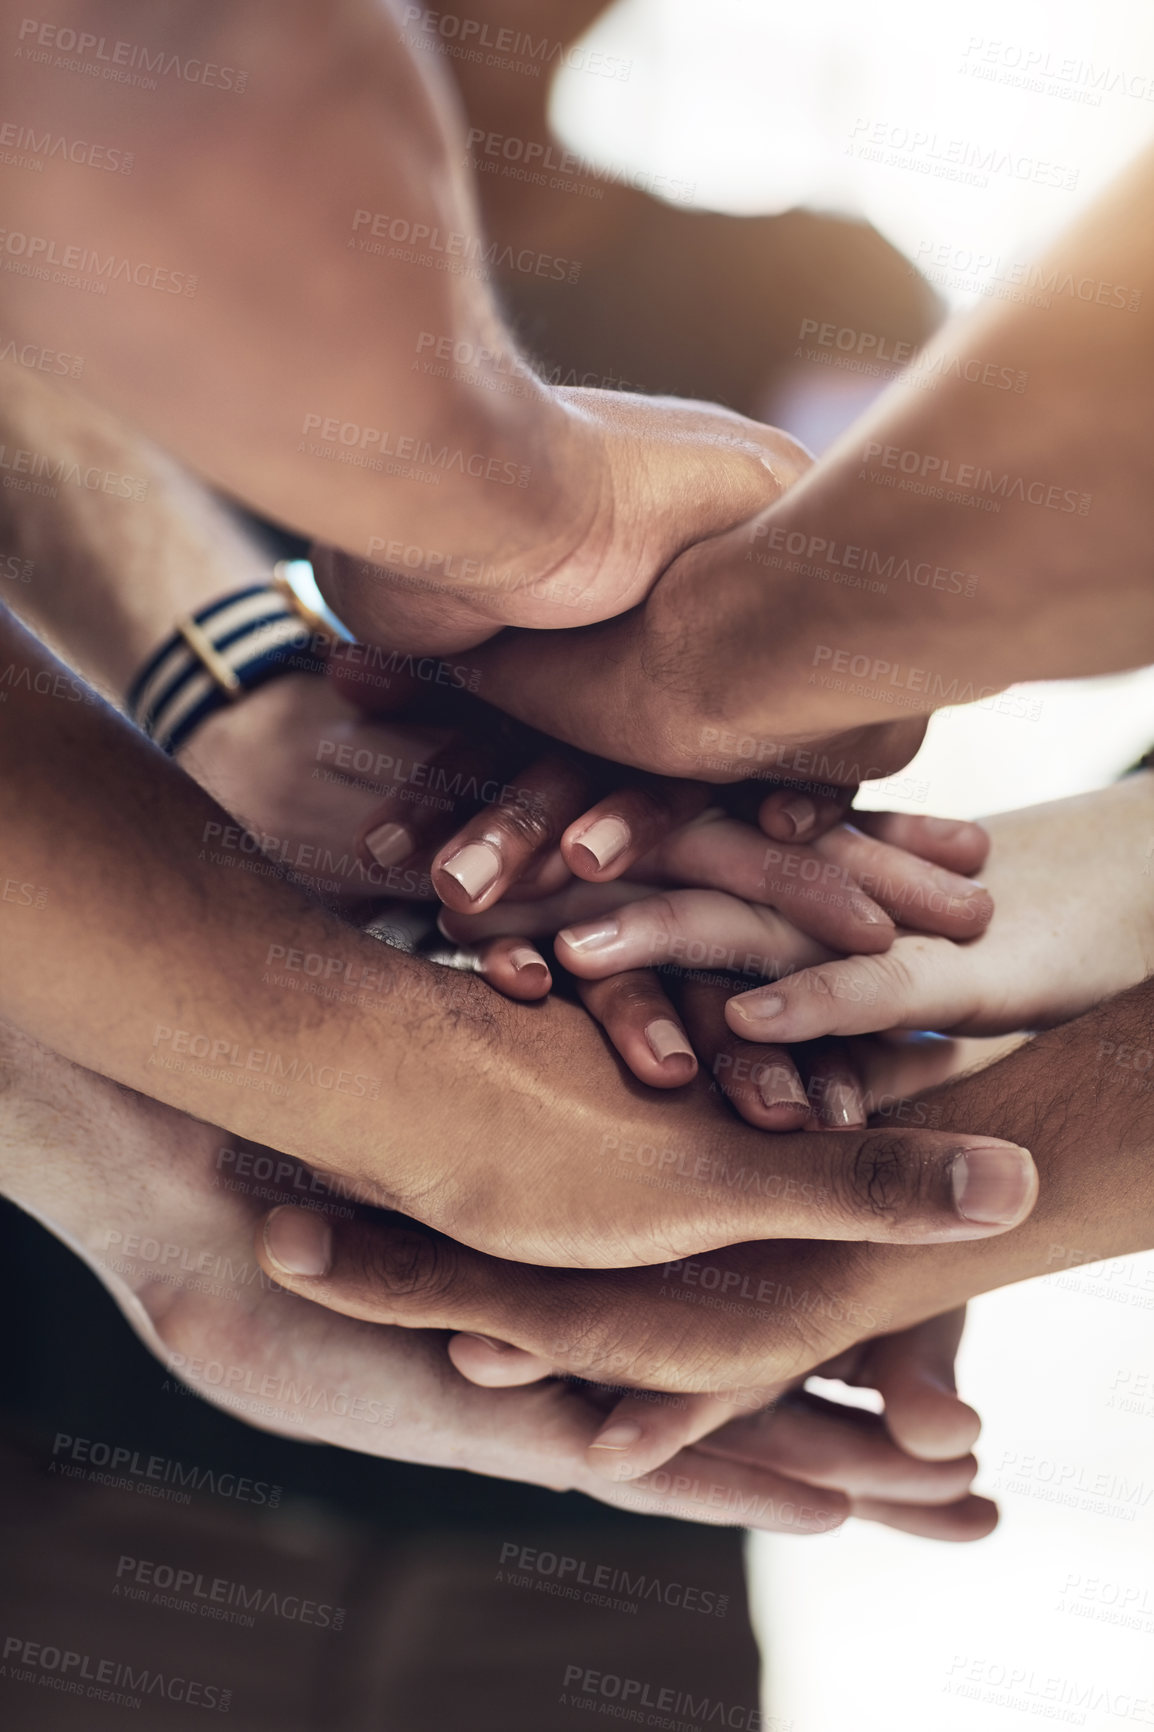 Buy stock photo Cropped shot of a work group joining hands in solidarity